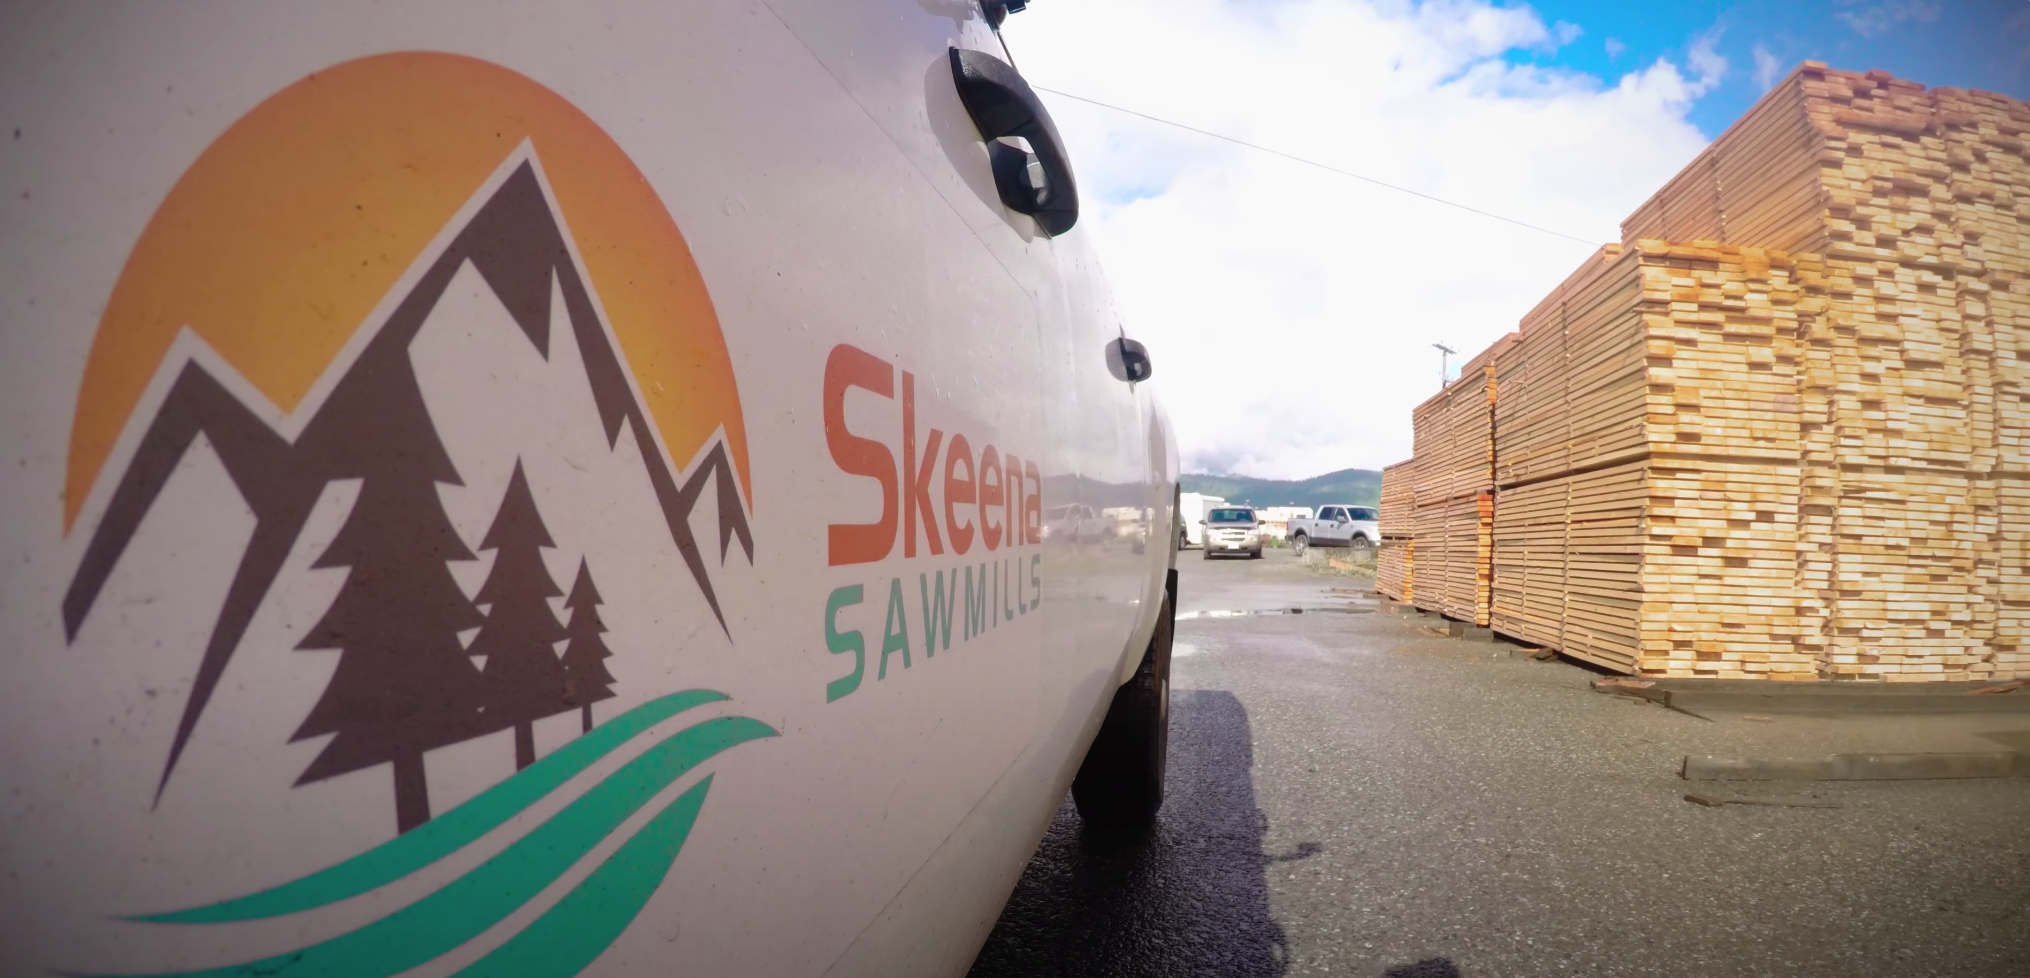 A white pickup truck with the Skeena Sawmills logo on the side drives through the mill's lumber yard.